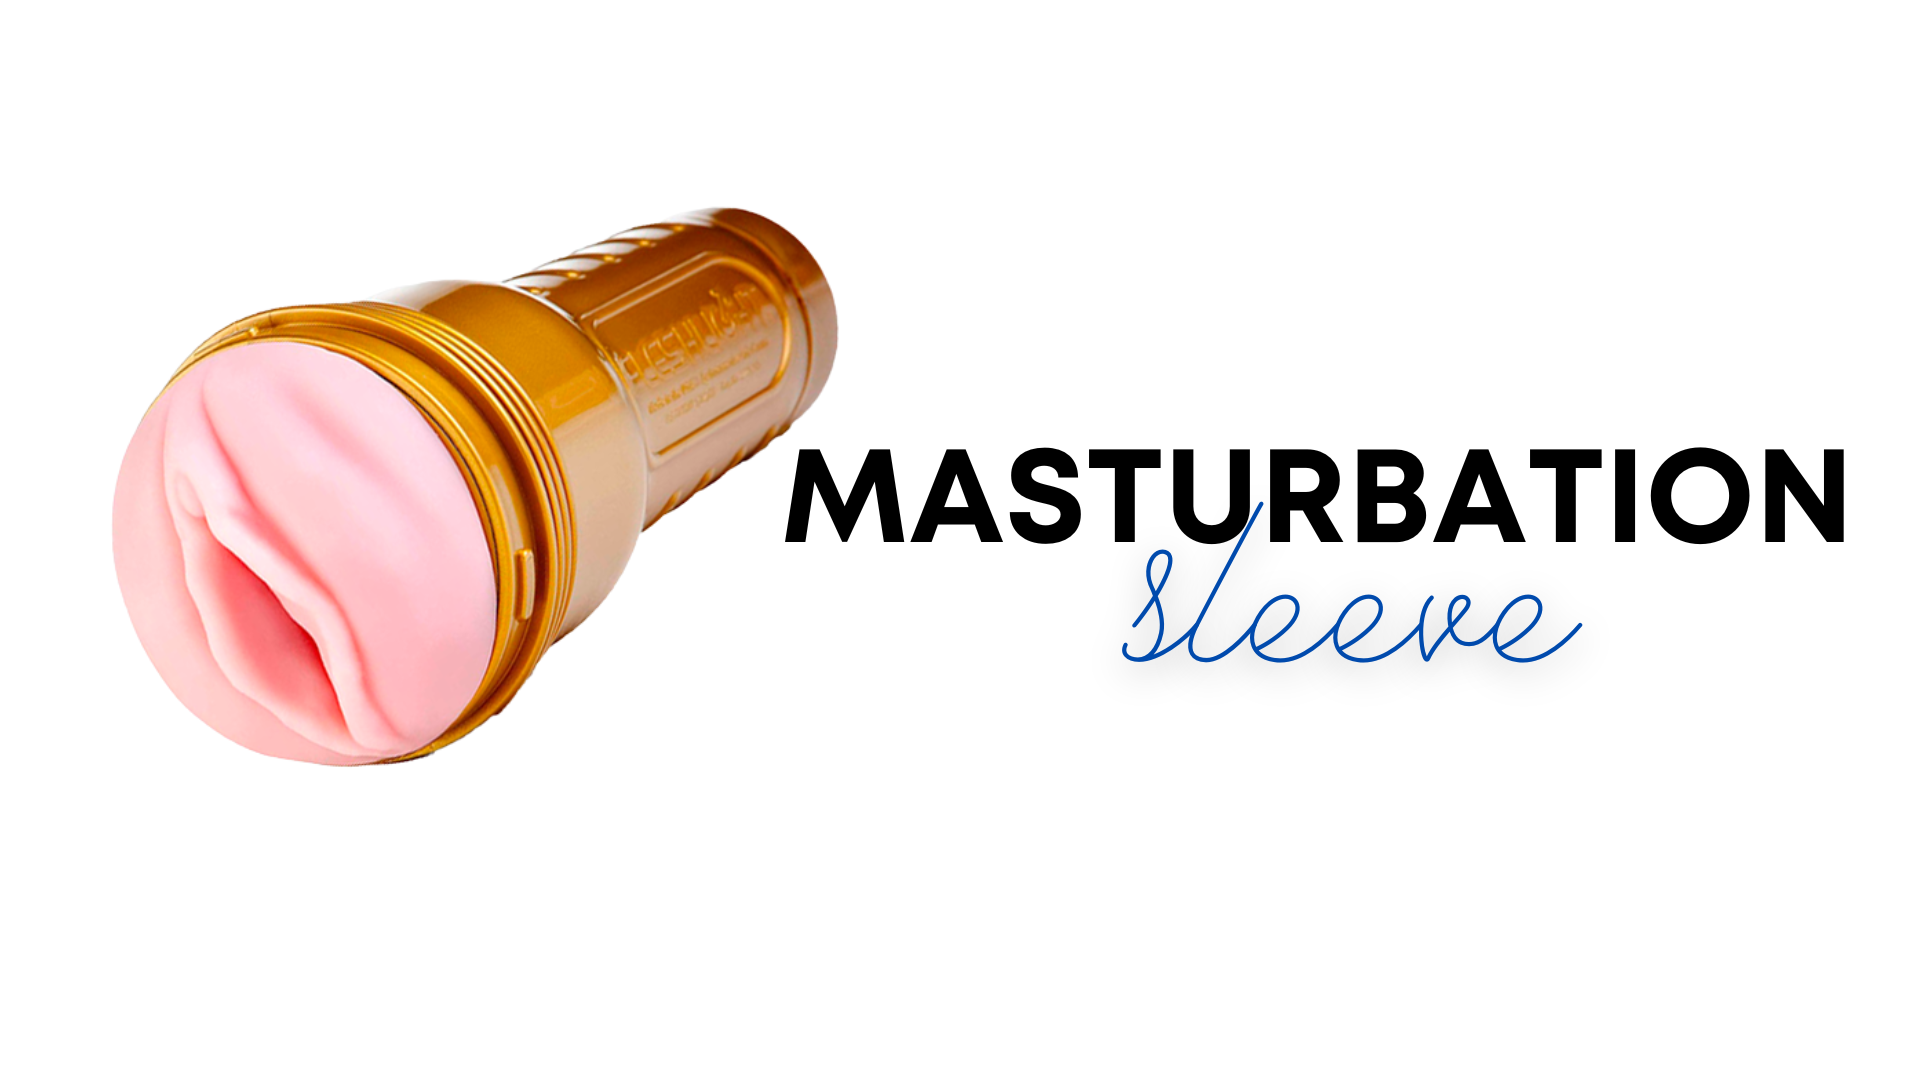 A pink Masturbation Sleeve with gold handle